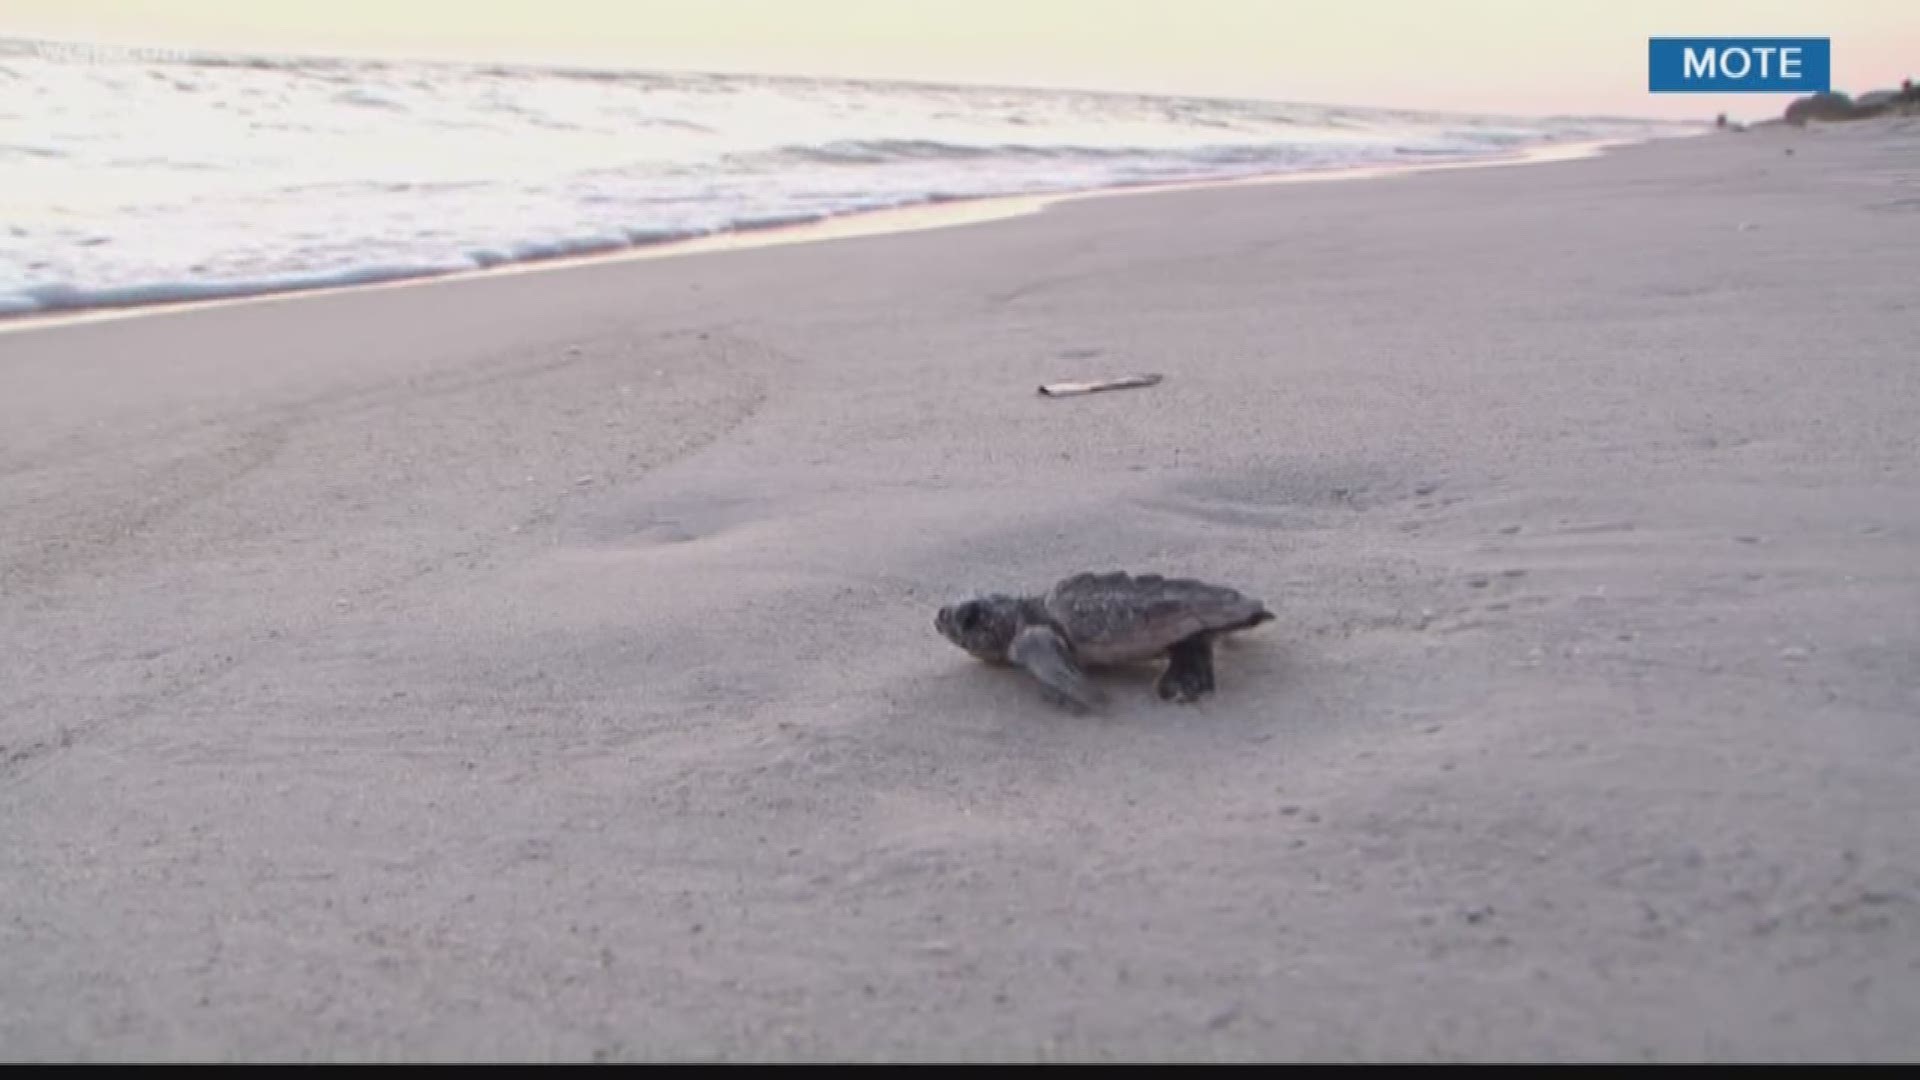 A Mote biologist said the record for sea turtle nests in one year was 4,588.